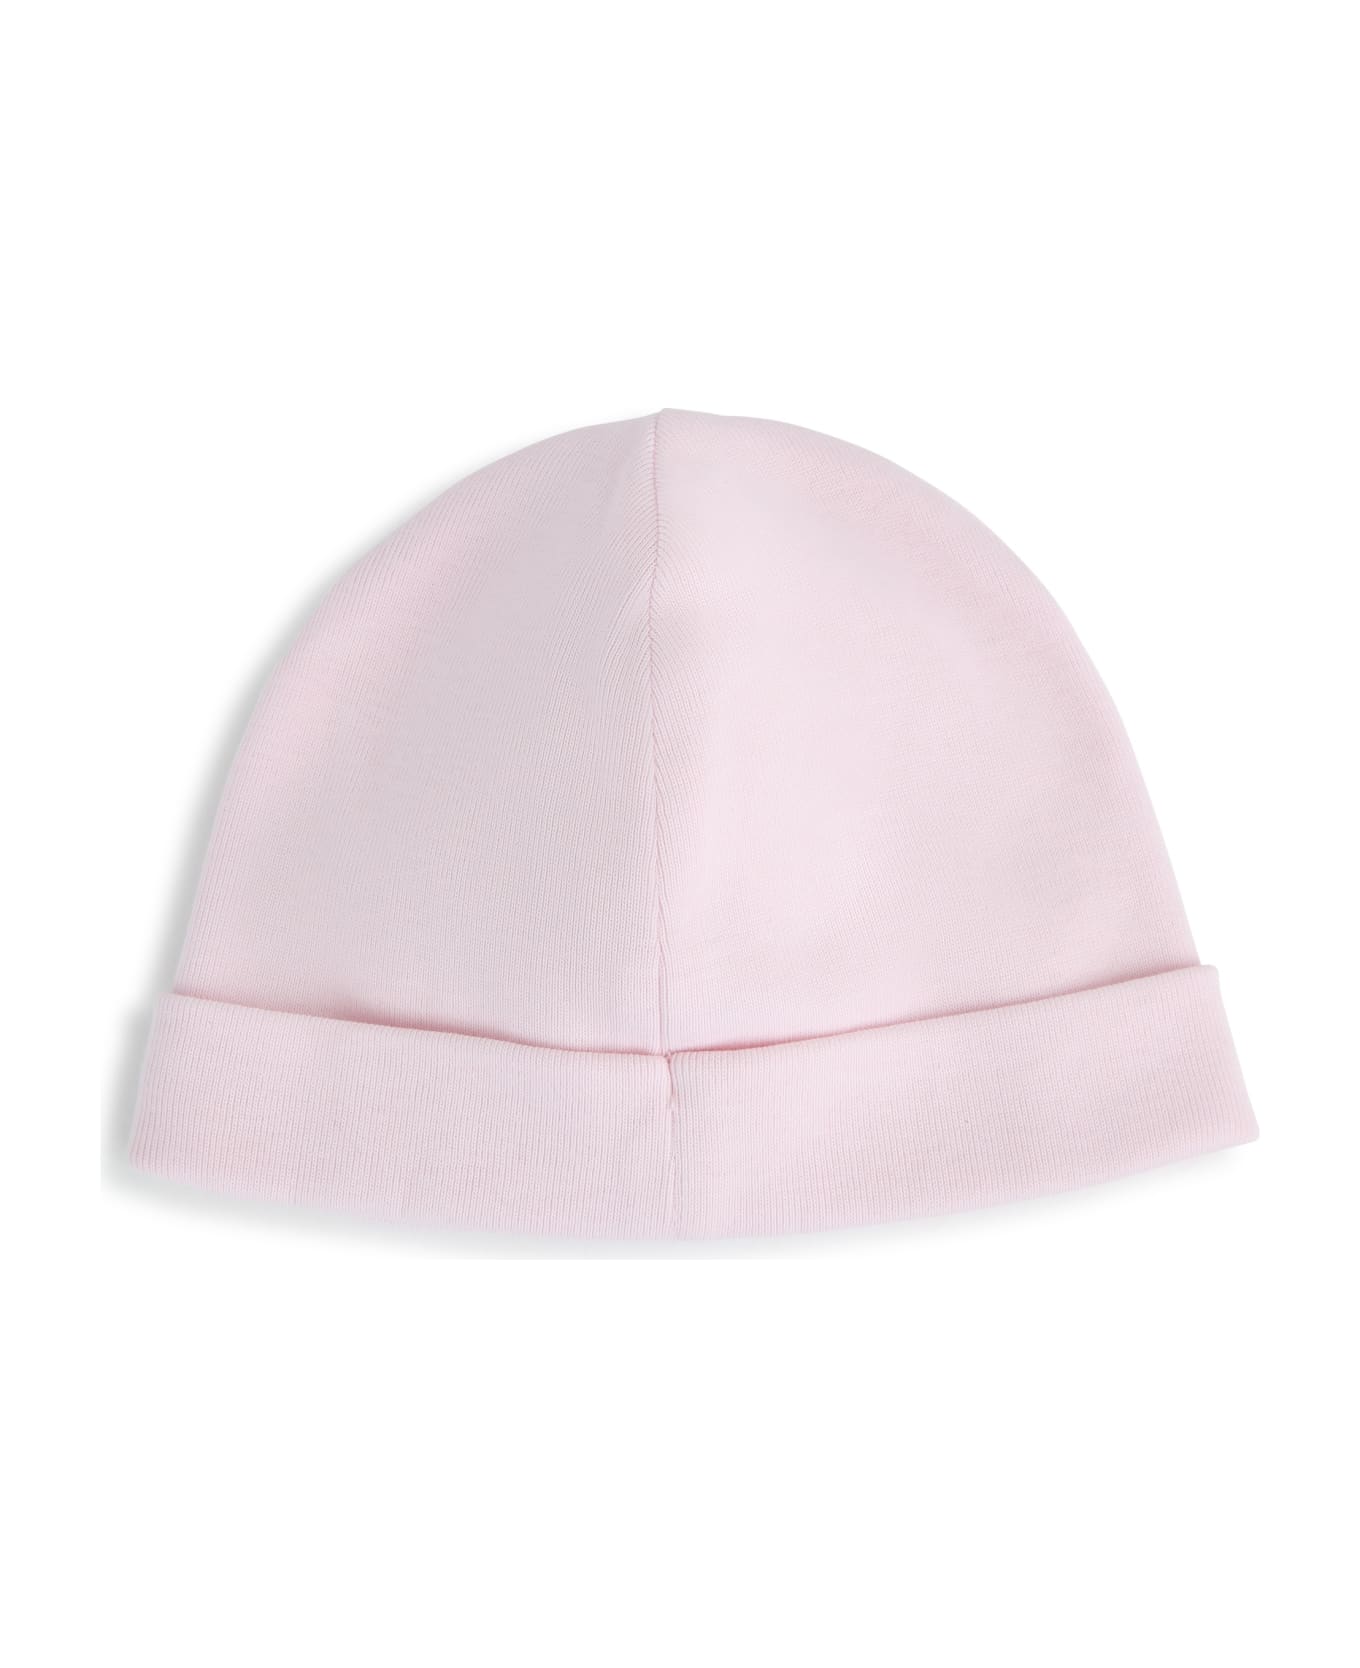 Givenchy Set Of Two Caps With 4g Print - Pink アクセサリー＆ギフト